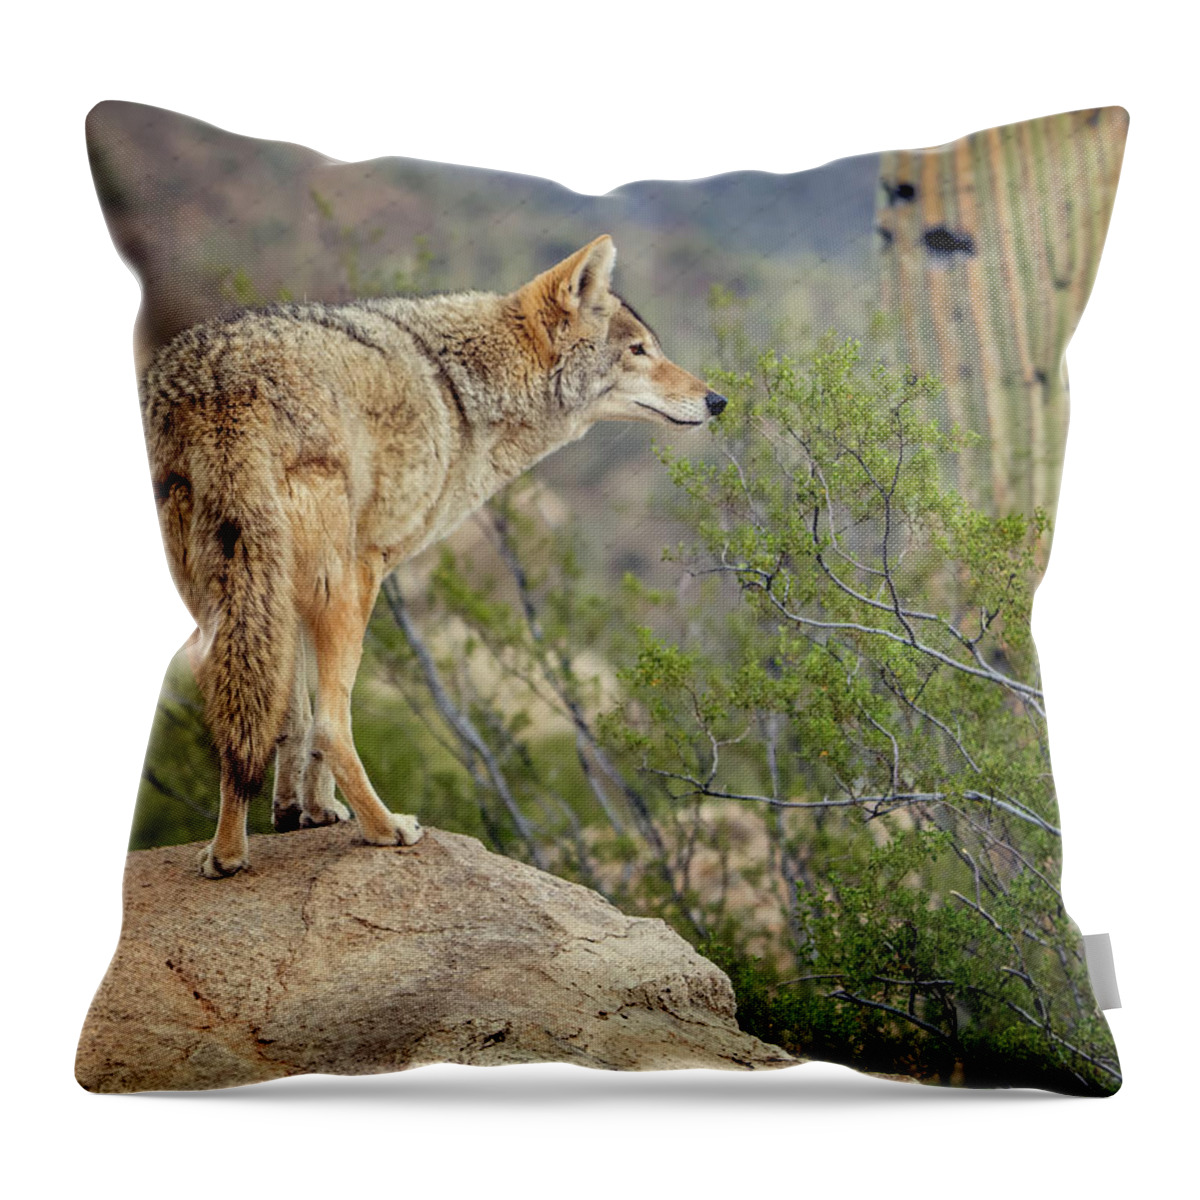 Coyote Throw Pillow featuring the photograph Coyote by Tam Ryan